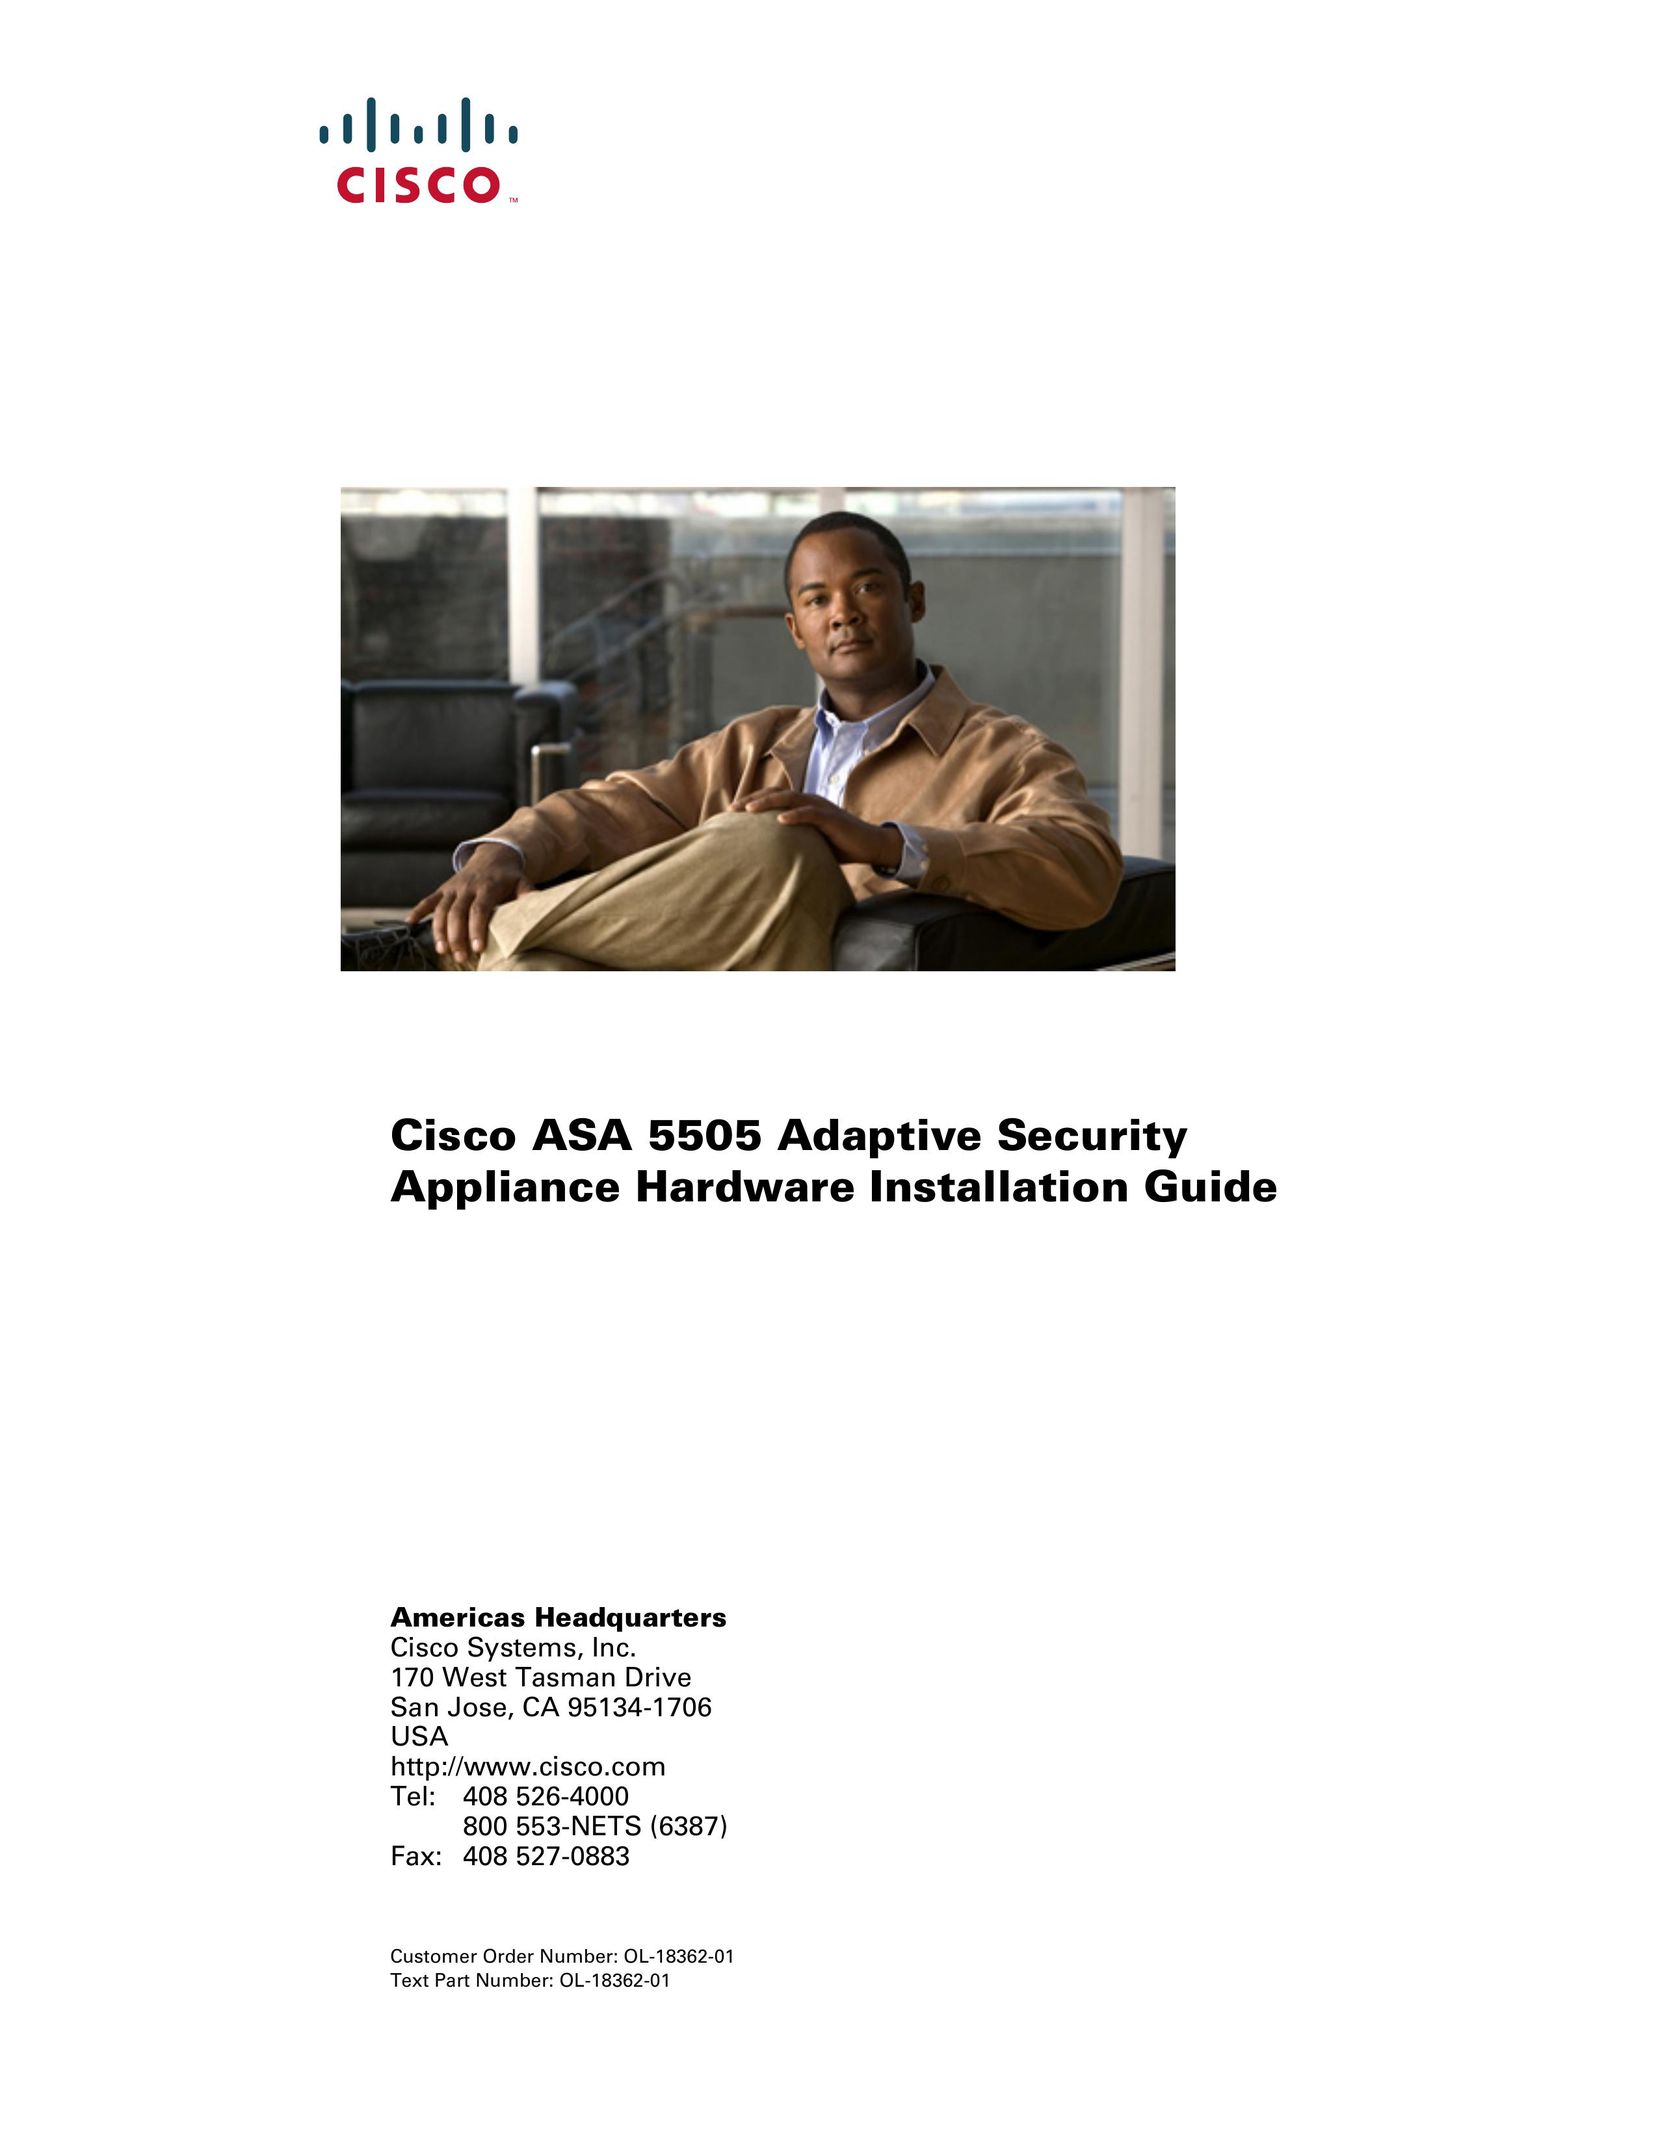 Cisco Systems ASA 5505BUNK9 Home Security System User Manual